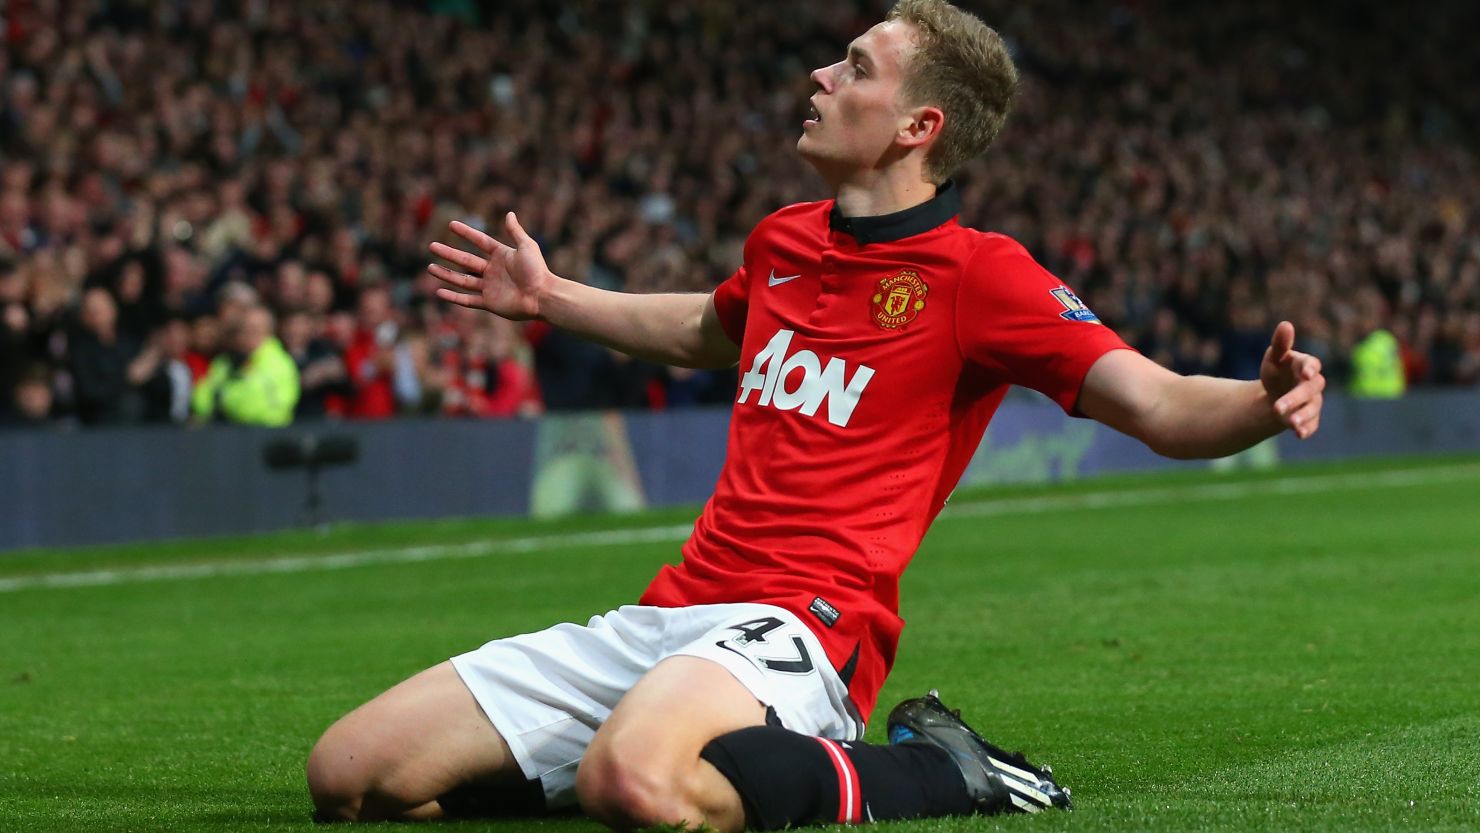 James Wilson, 18, marked his Manchester United debut with two goals in the 3-1 victory over Hull City.